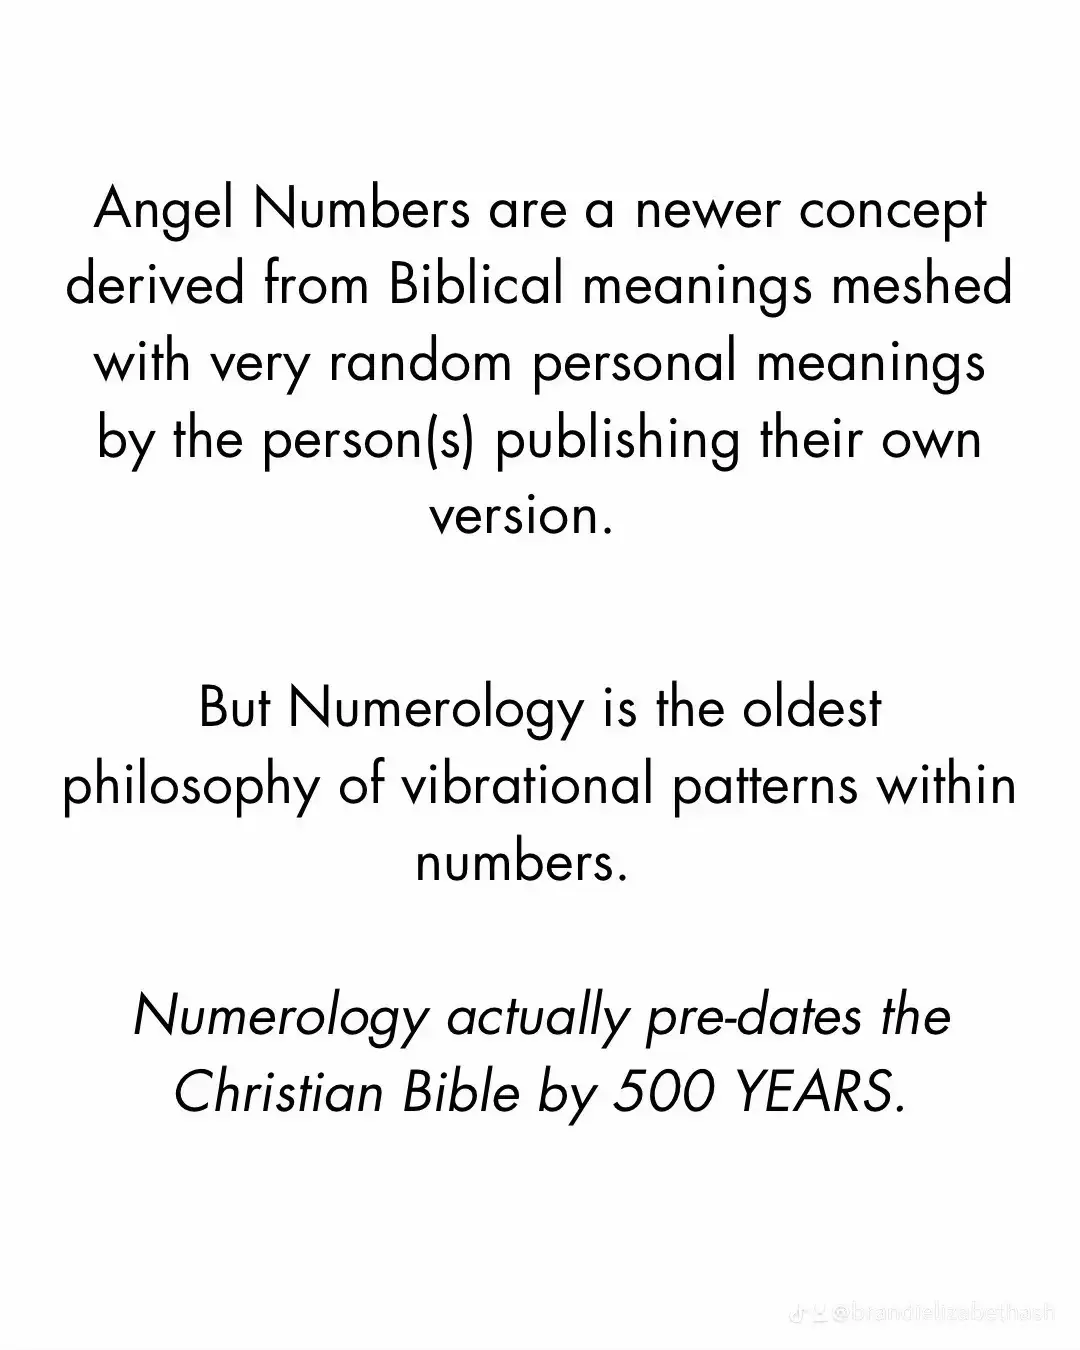  A poster with a white background and black text that says "angel numbers are a newer concept derived from Biblical meanings meshed with very random personal meanings by the person(s) publishing their own version. But Numerology is the oldest philosophy of vibrational patterns within numbers. Numerology actually pre-dates the Christian Bible by 500 YEARS."